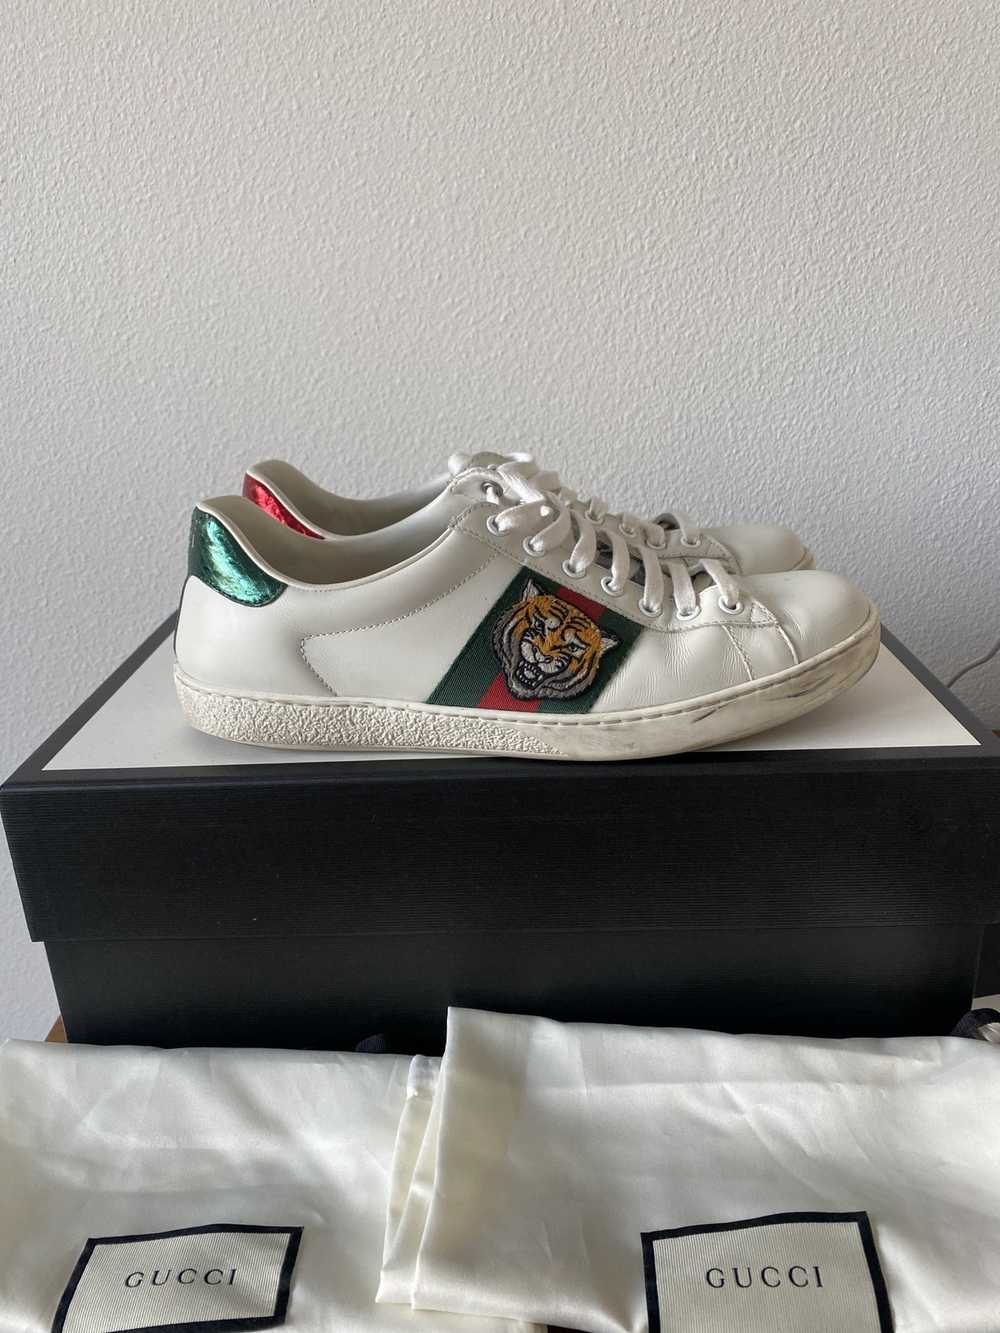 Gucci Gucci Ace Embroidered Tiger Sneakers - image 2